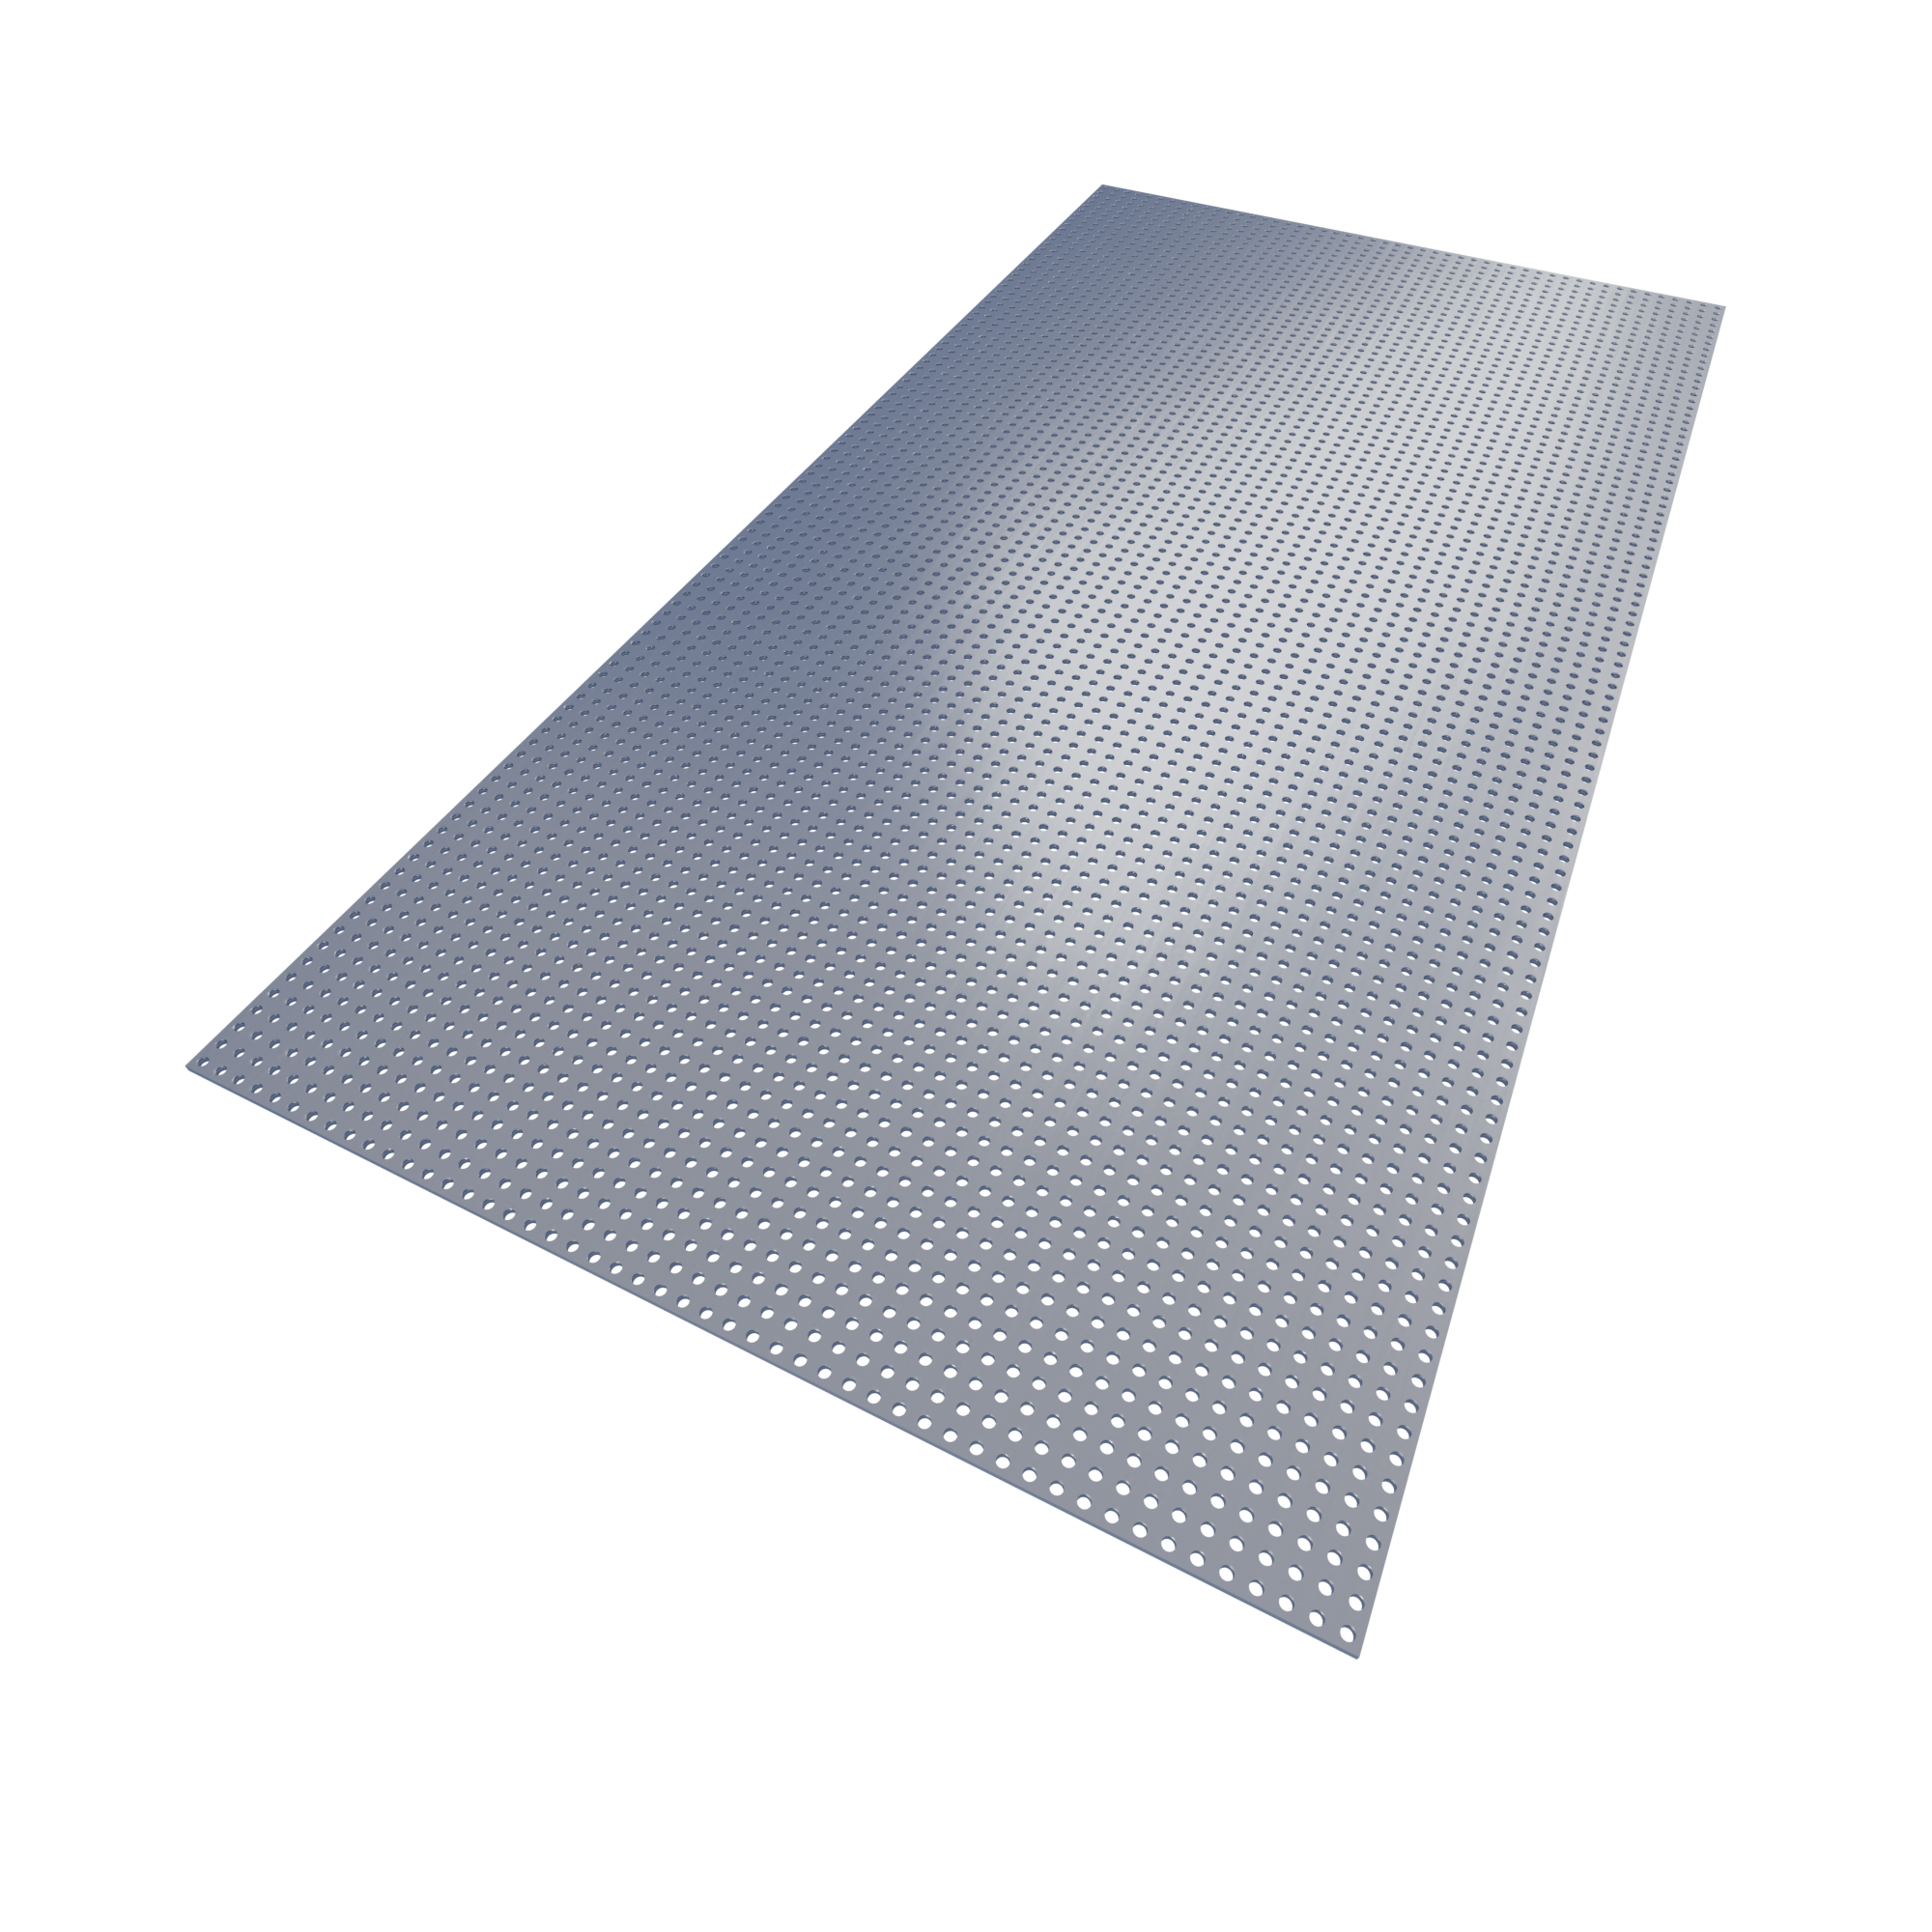 Perforated plate 0.75